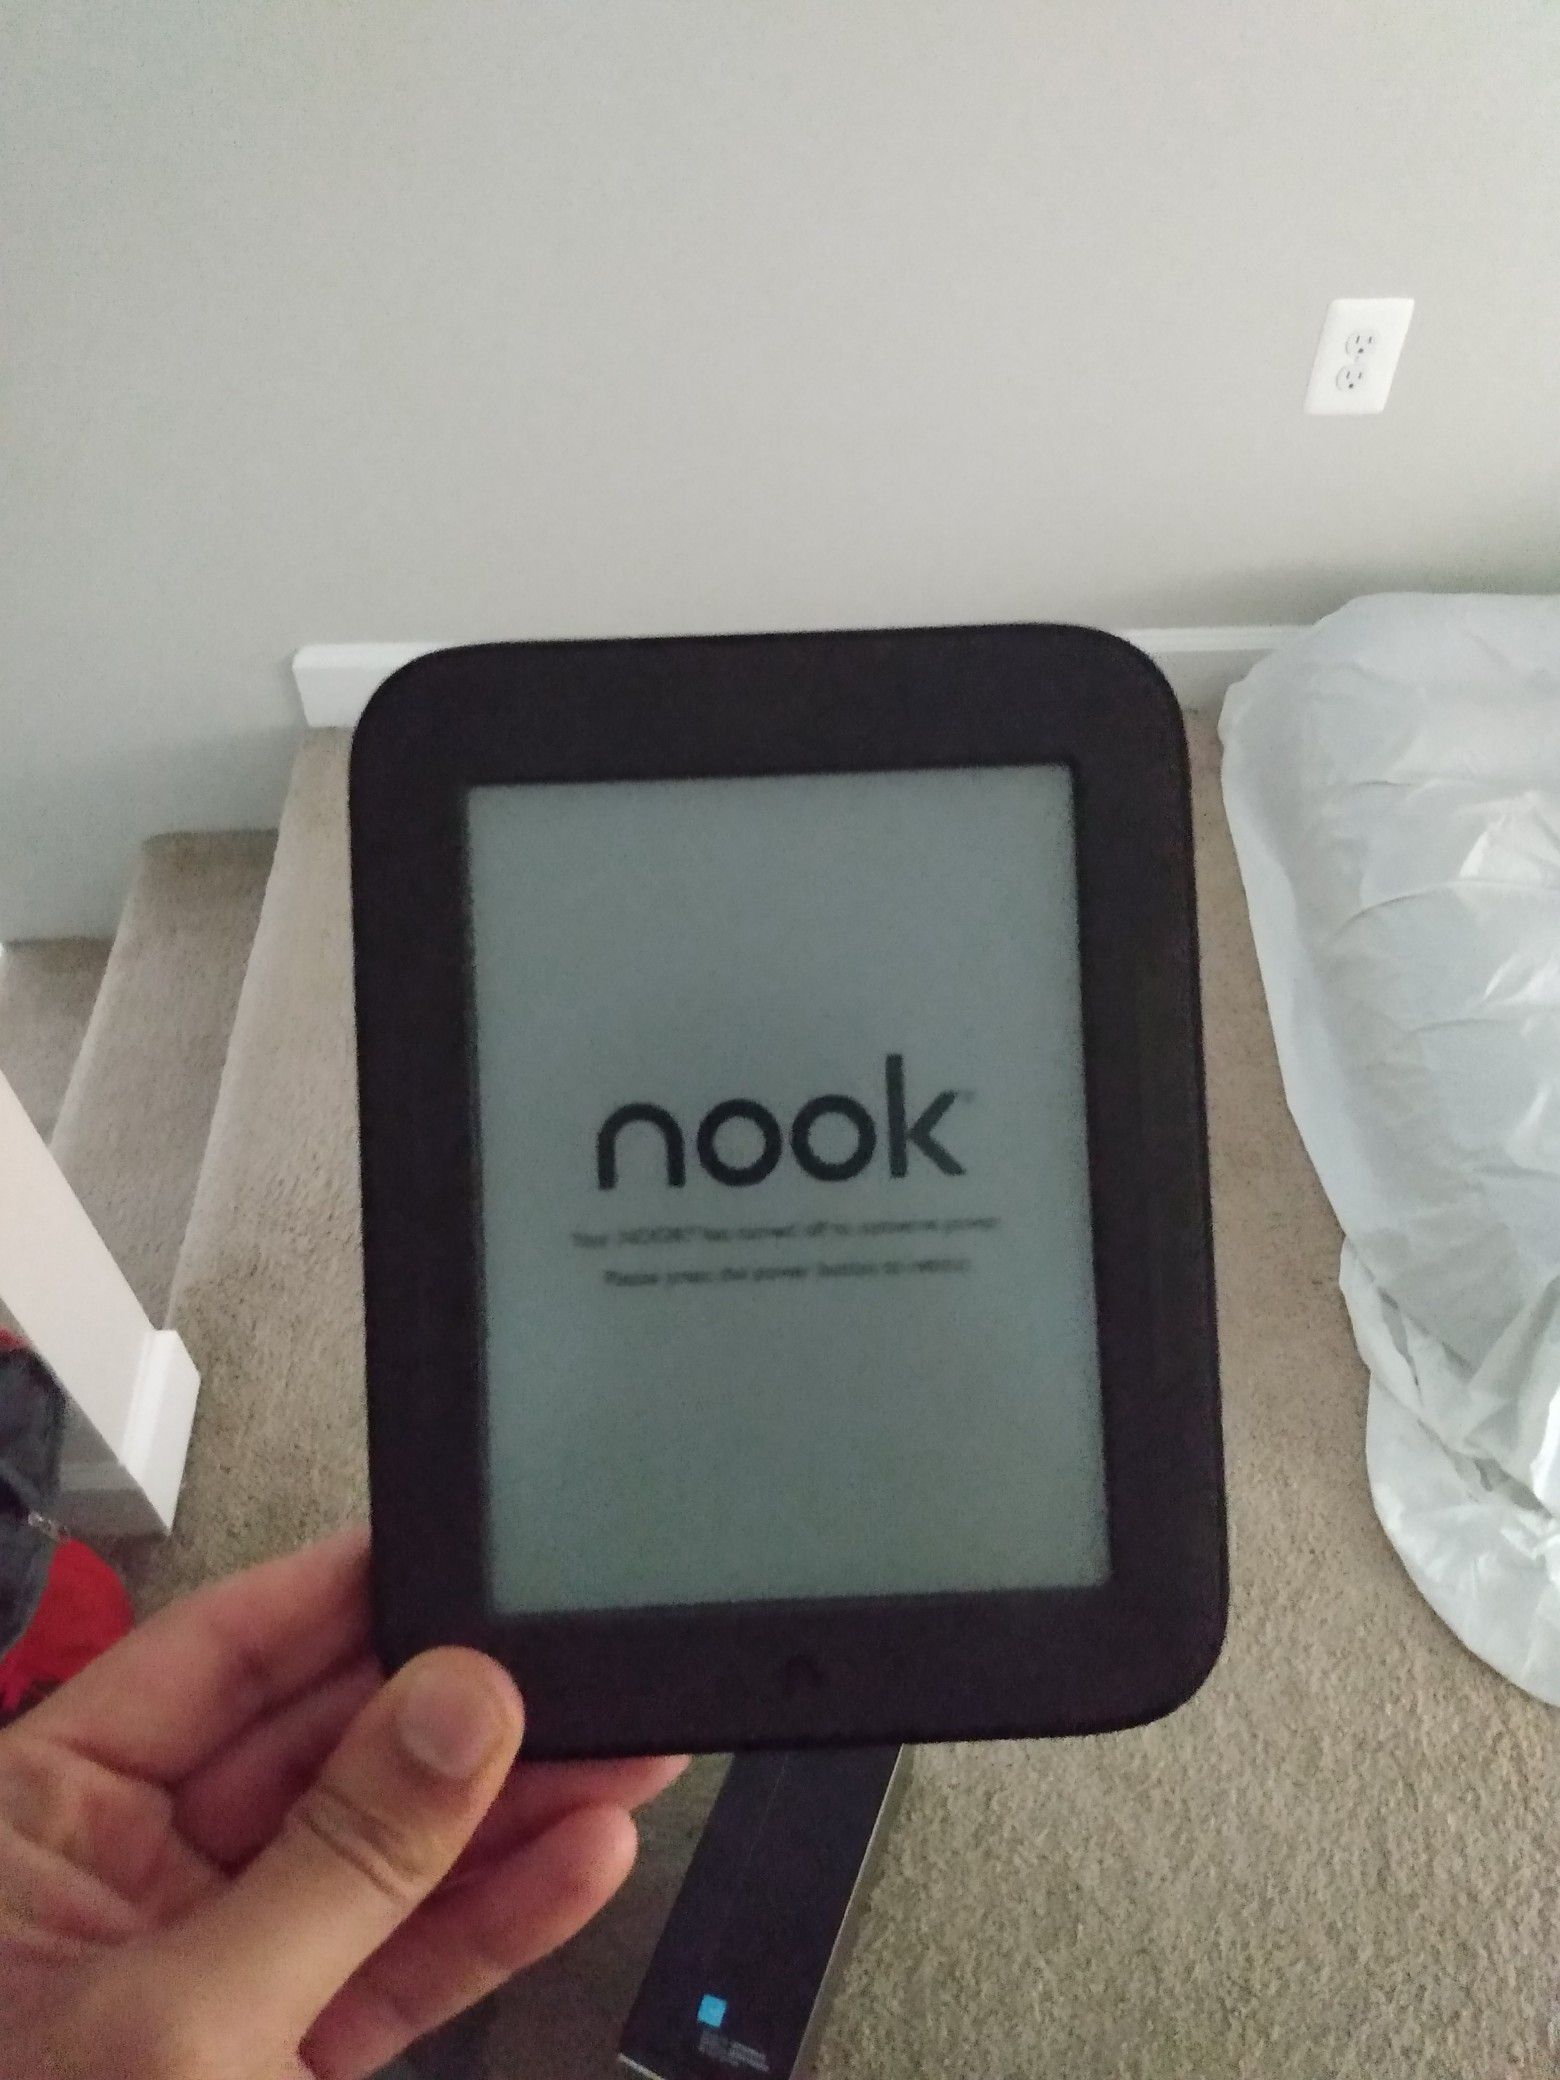 Nook 6" Touch E-book reader (like Kindle)